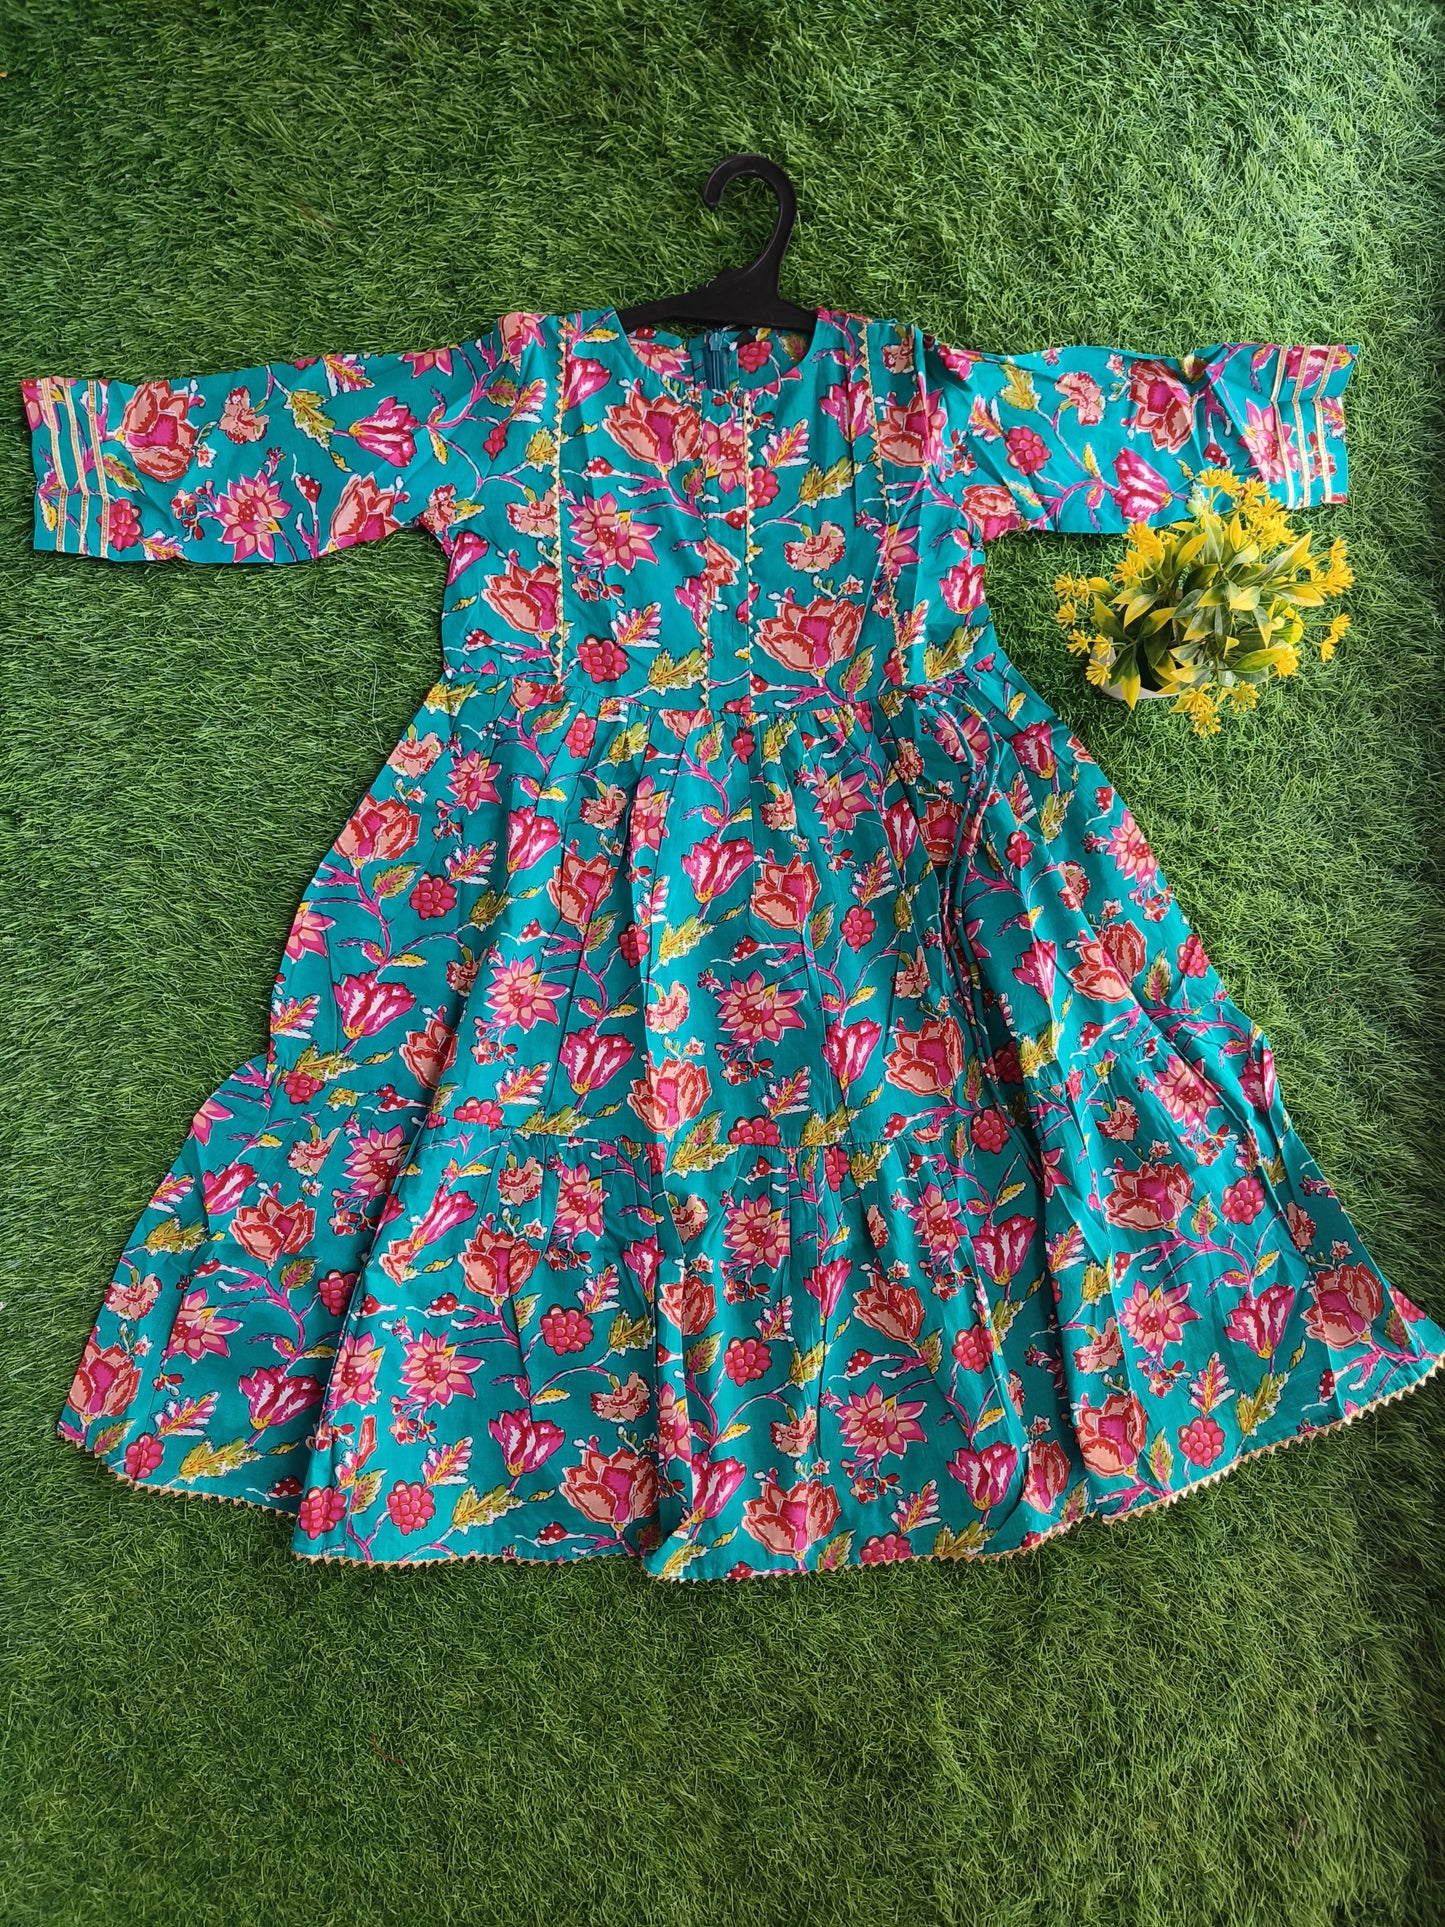 Glorious Antique Flowered Printed Cotton Frock Outfit for Girl